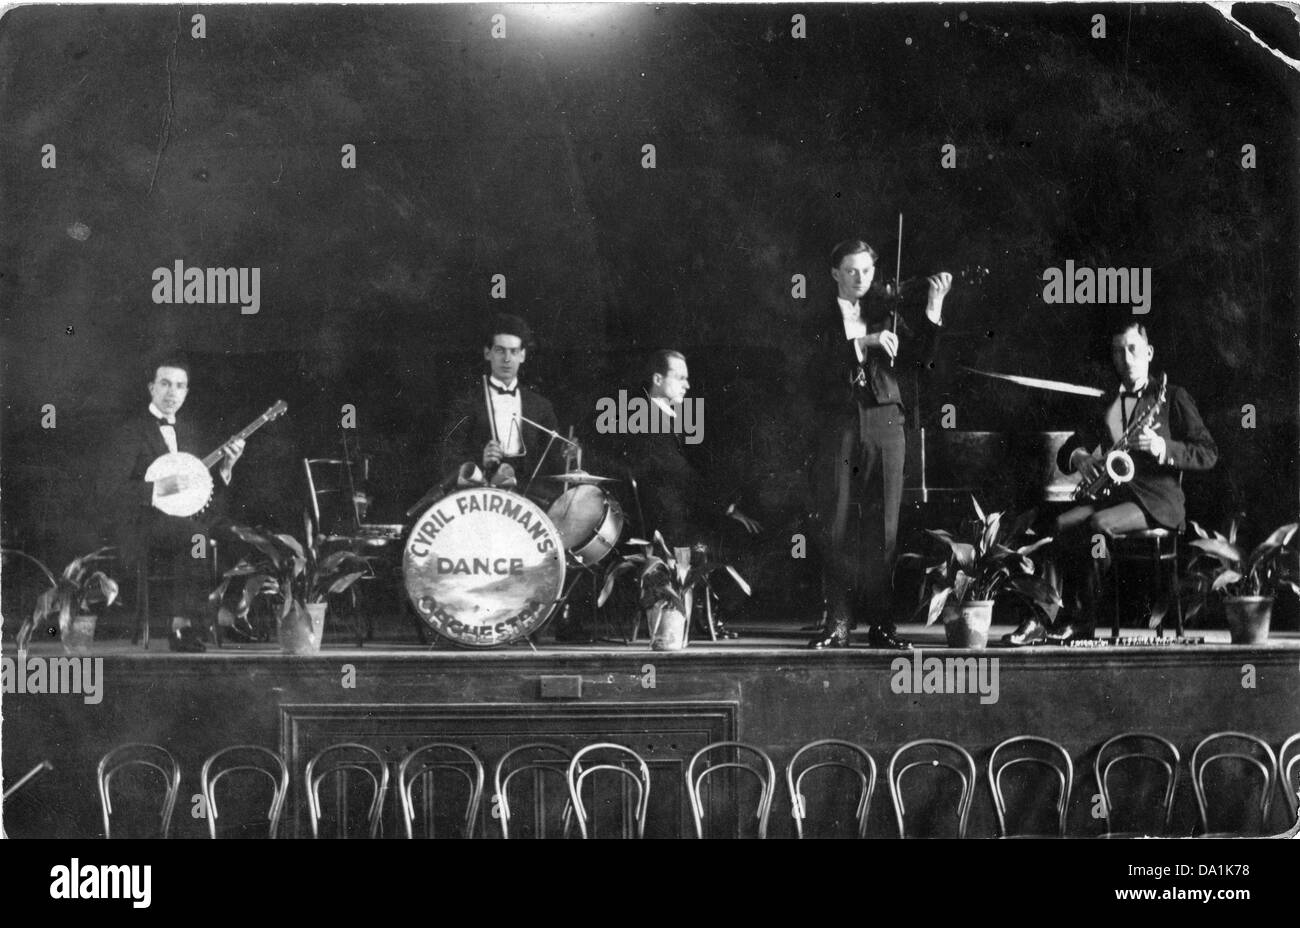 Black and white photograph of the Cyril Fairman dance band posing with instruments on a stage with a row of wooden chairs in front, circa 1920. Stock Photo